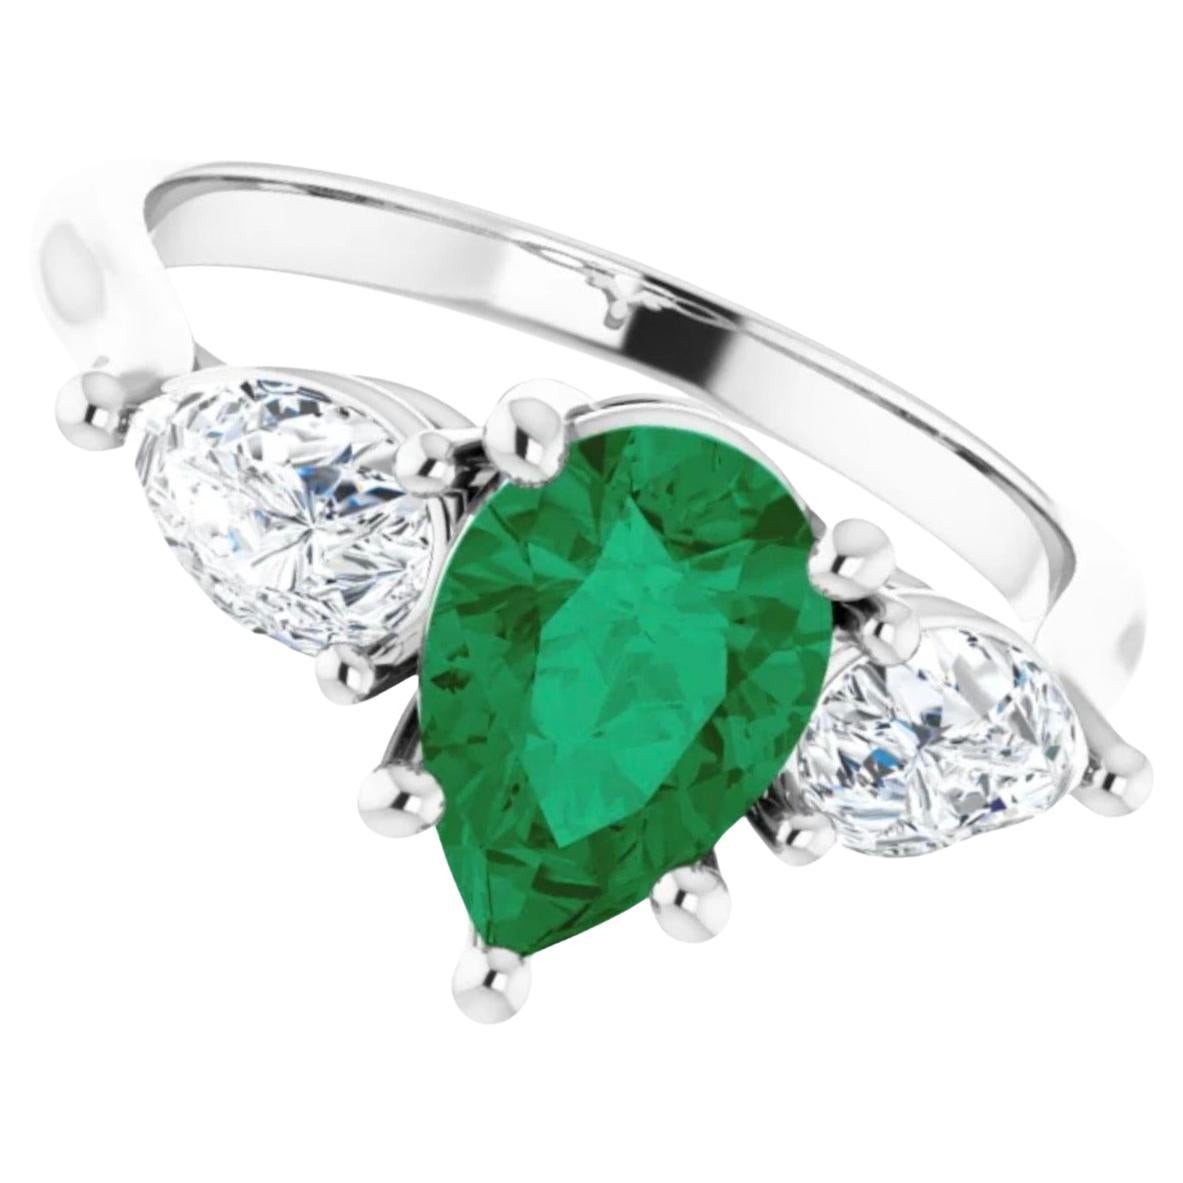 Platinum Emerald & Diamond Engagement Ring 3 Stone Pear Shape 
Primary Stones: Natural Colombian Emerald
Shape or Cut: Pear Cut
Average Color/Clarity: Medium Fine Green Color/Clarity VS
Total Emerald Weight: 1.50 Carats  (9.00x6.10mm)
Flanking the